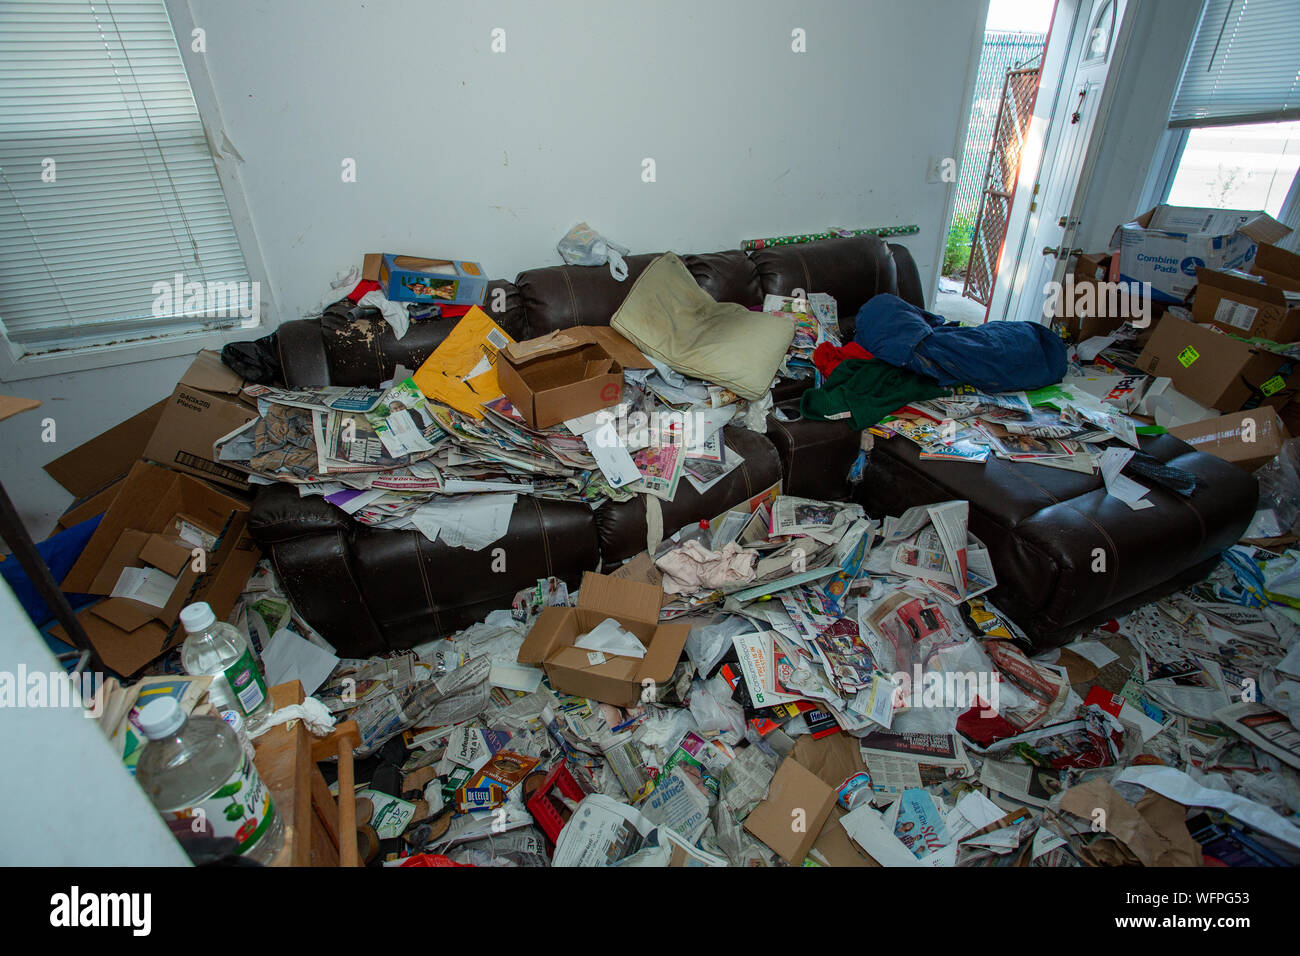 Living room area of an apartment of a hoarder with mental illness Stock Photo